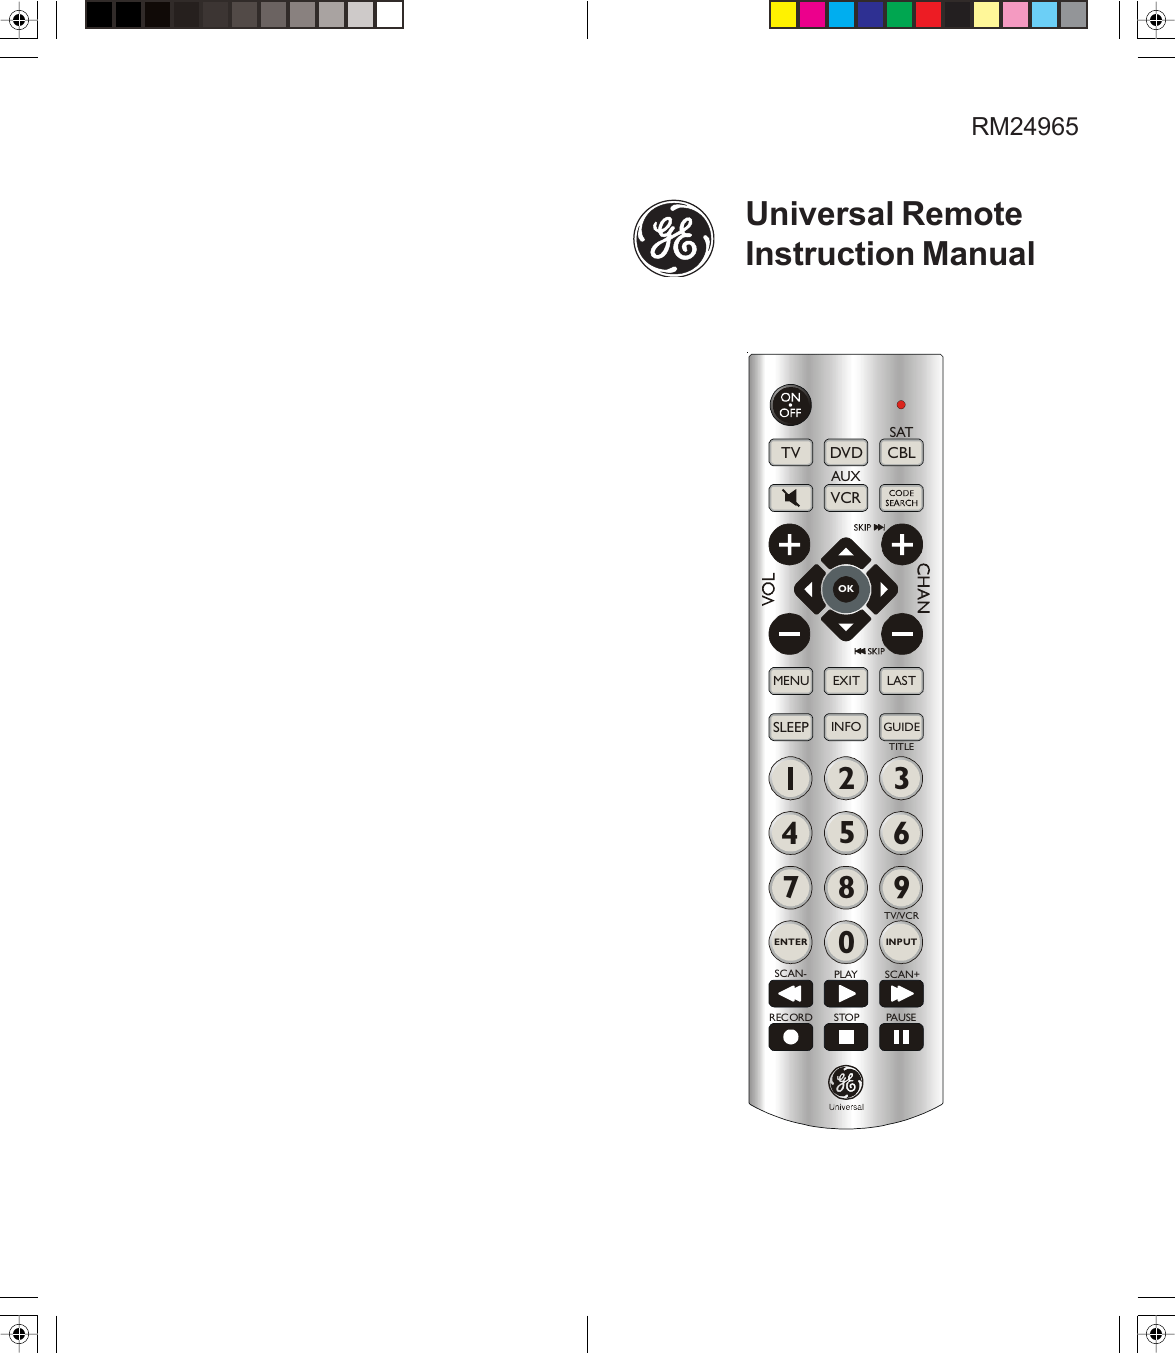 Page 1 of 9 - Ge-Appliances Ge-24965-Ge-Universal-Remote-Owners-Manual RM24965-OM .pmd